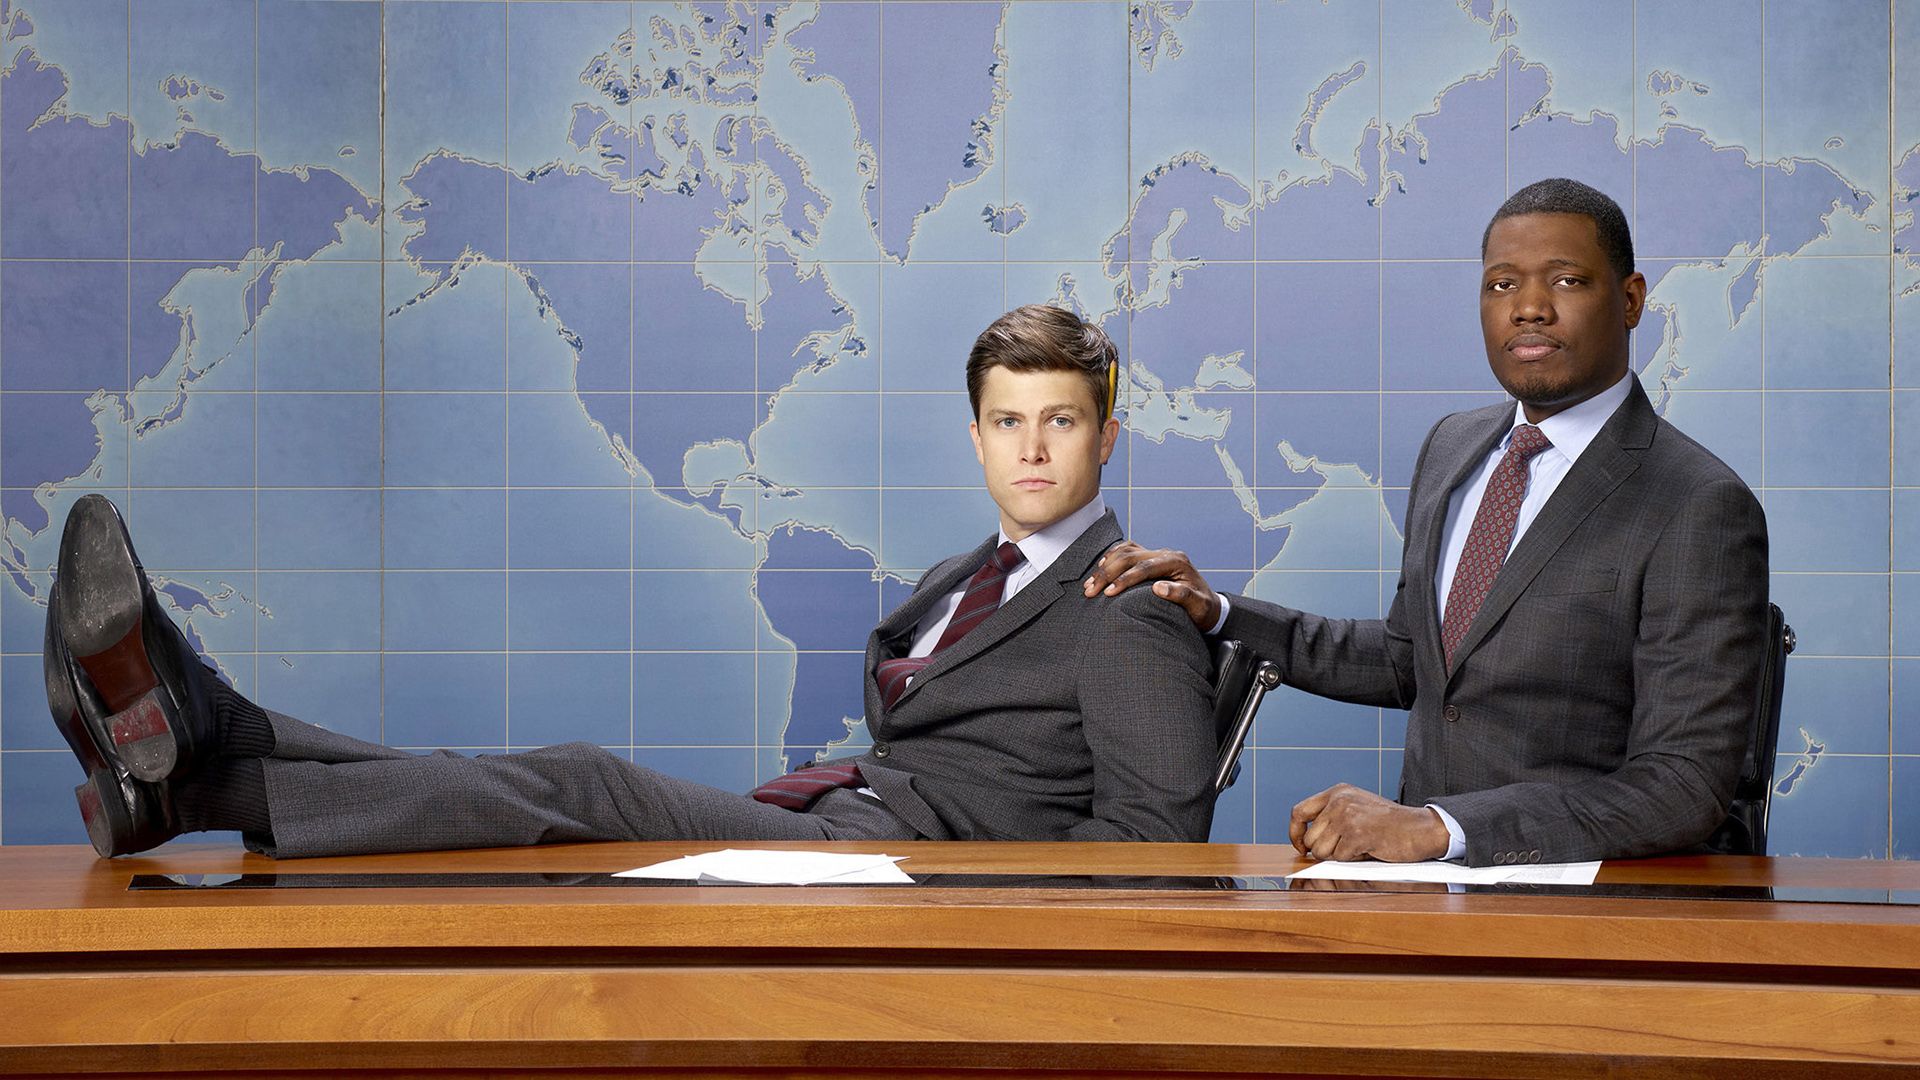 Saturday Night Live: Weekend Update Thursday background